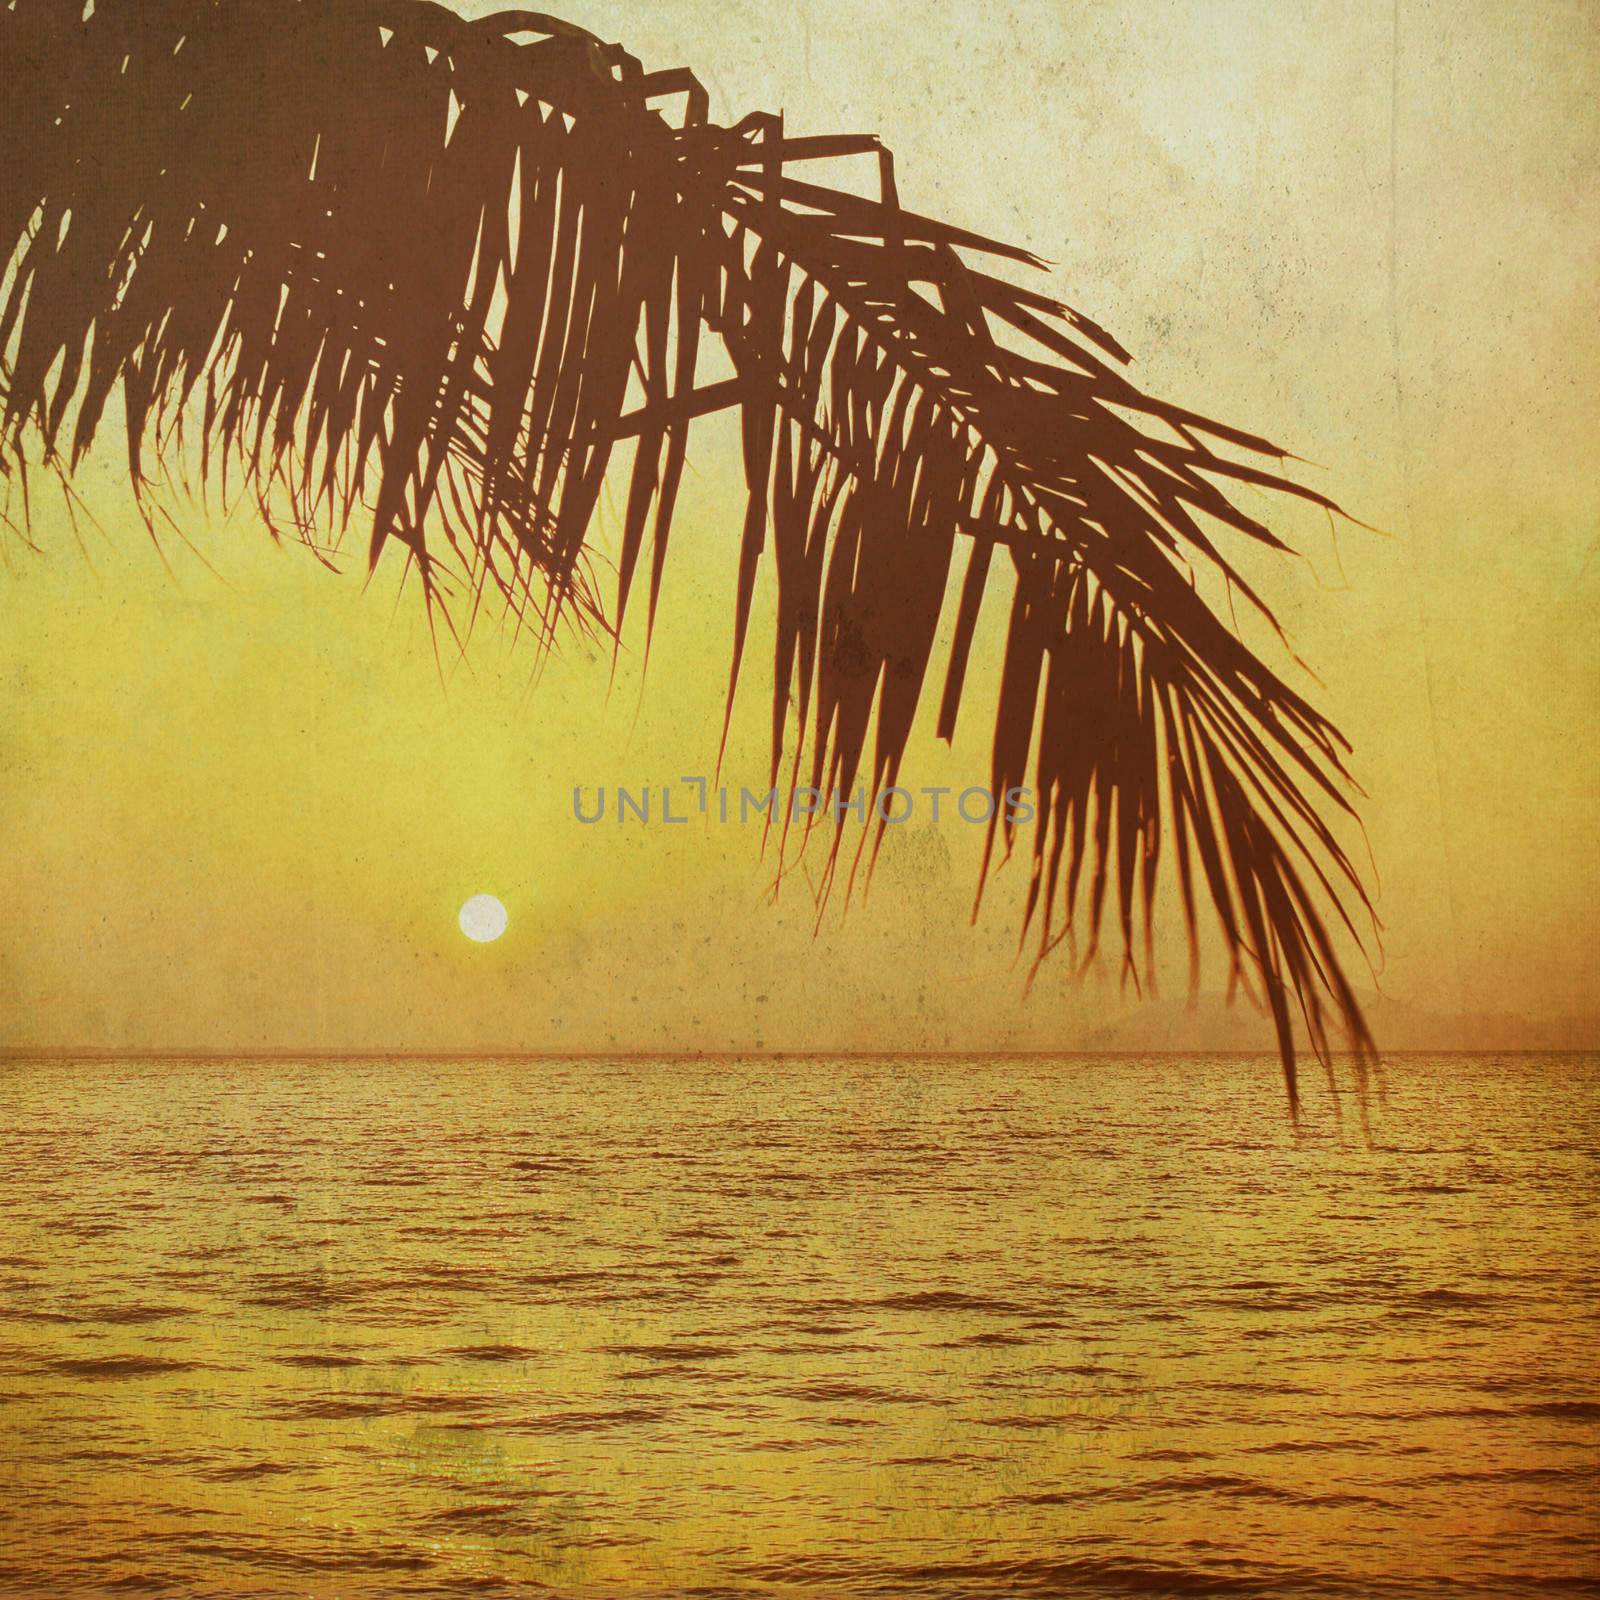 Coconut palm tree silhouetted and sunrise 
in vintage background by nuchylee